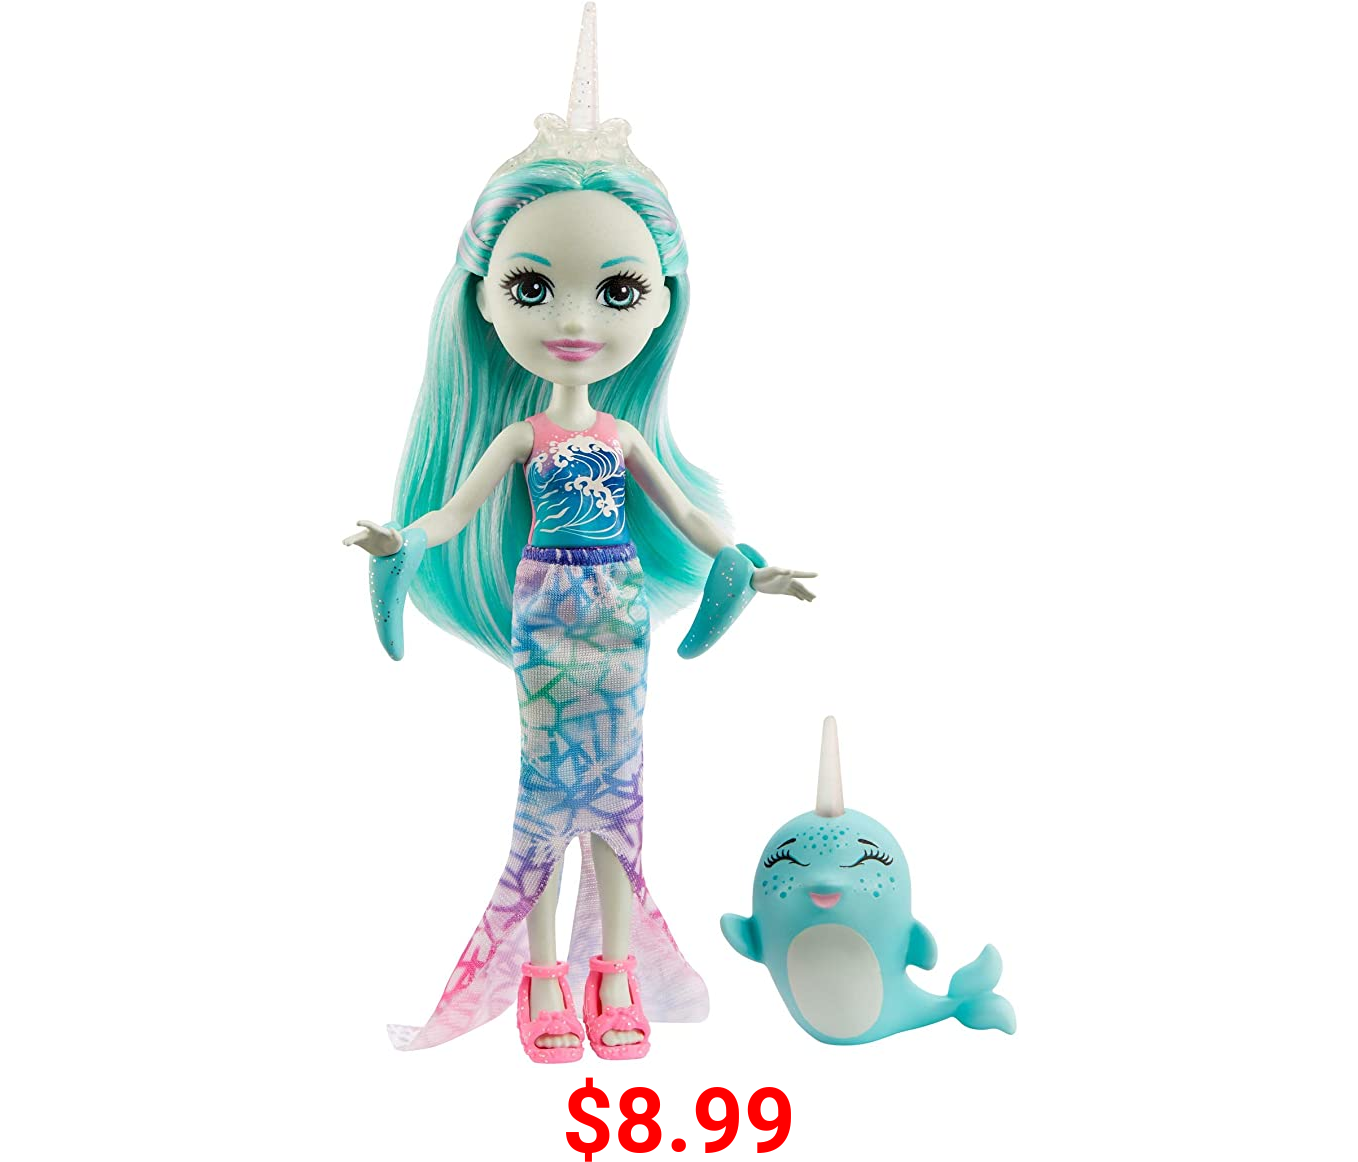 Mattel Enchantimals Naddie Narwhal Small Doll (6-in) & Sword Animal Friend Figure, 6-inch Small Doll with Mermaid Skirt, Fins, and Shoes, Great Gift for 3 to 8 Year Olds